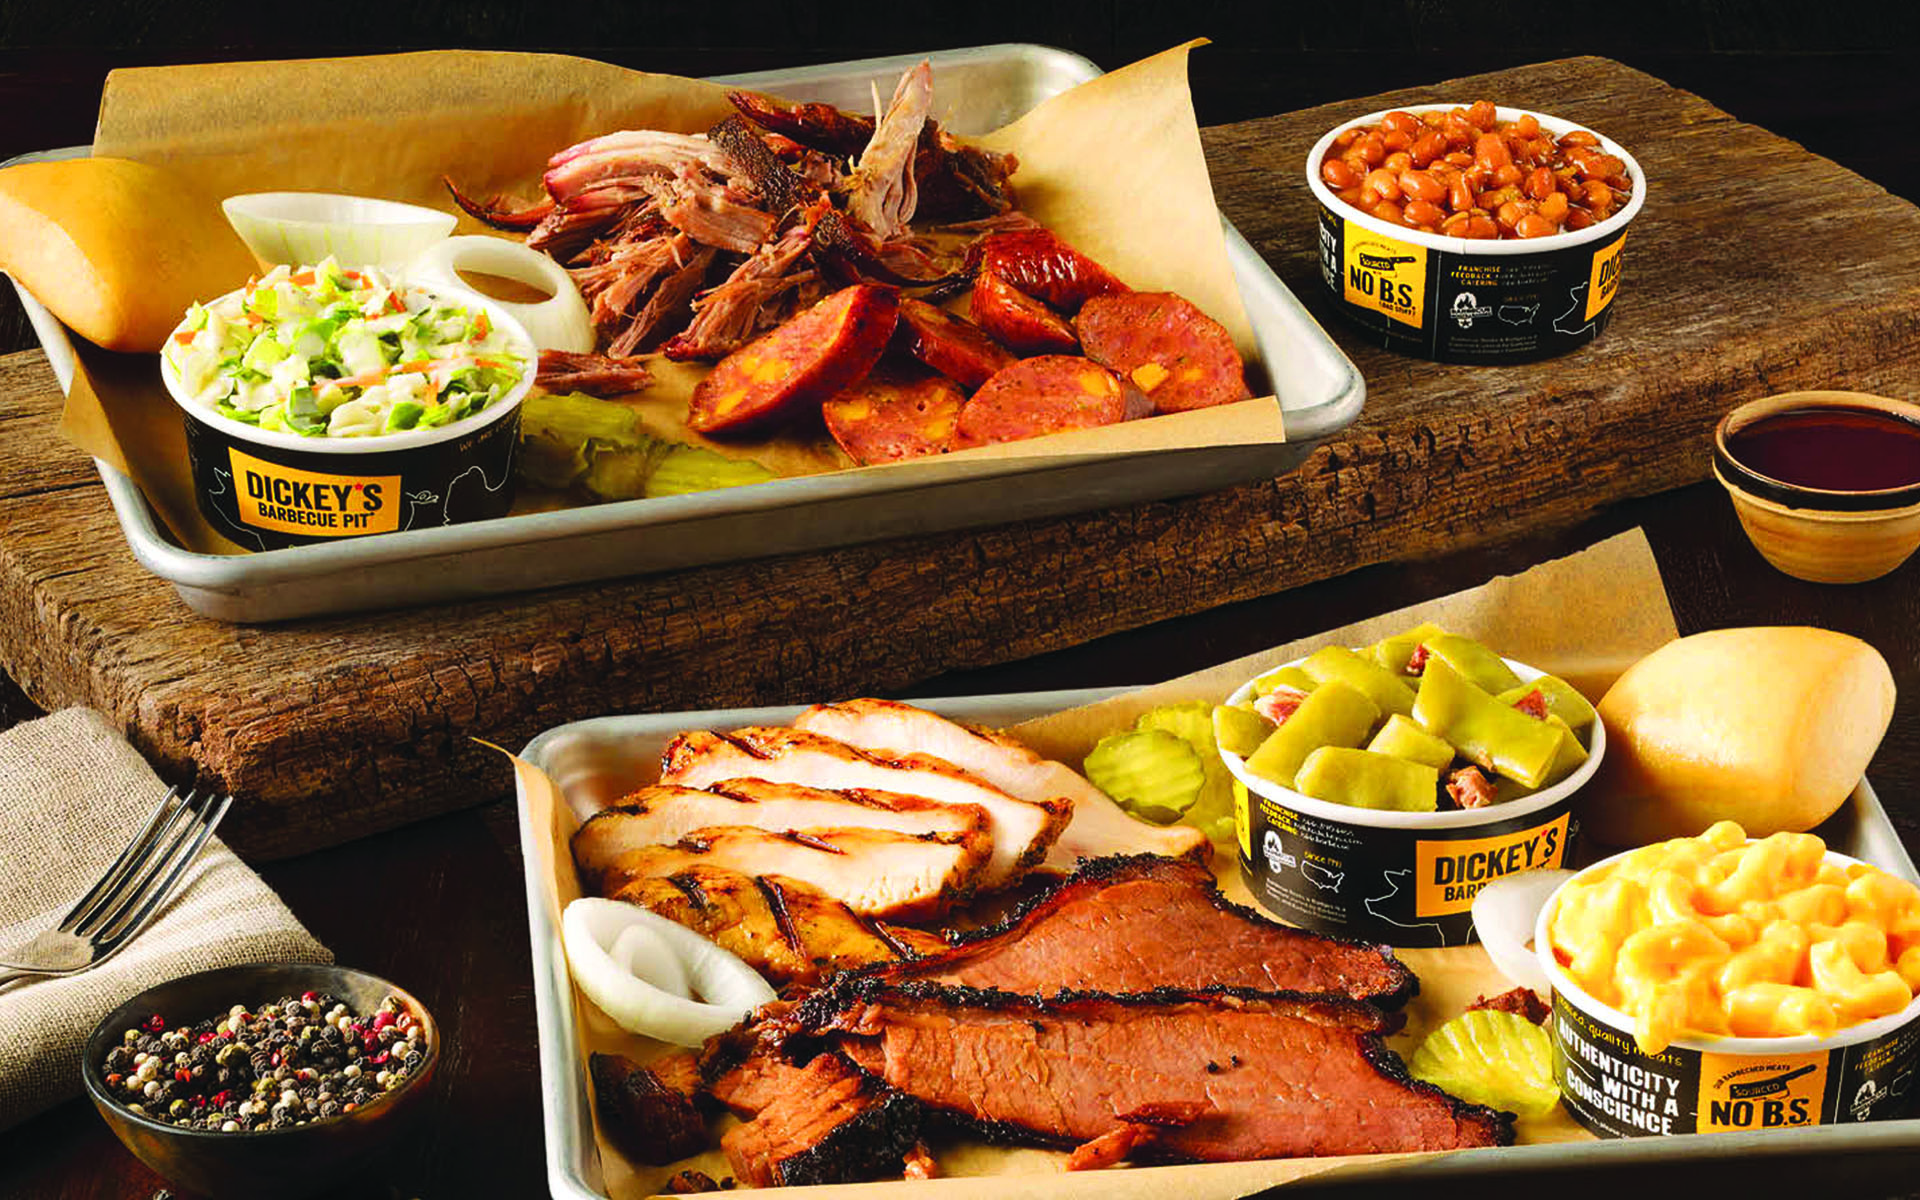 Dickey's Barbecue Pit in Garden City, ID at Restaurant.com